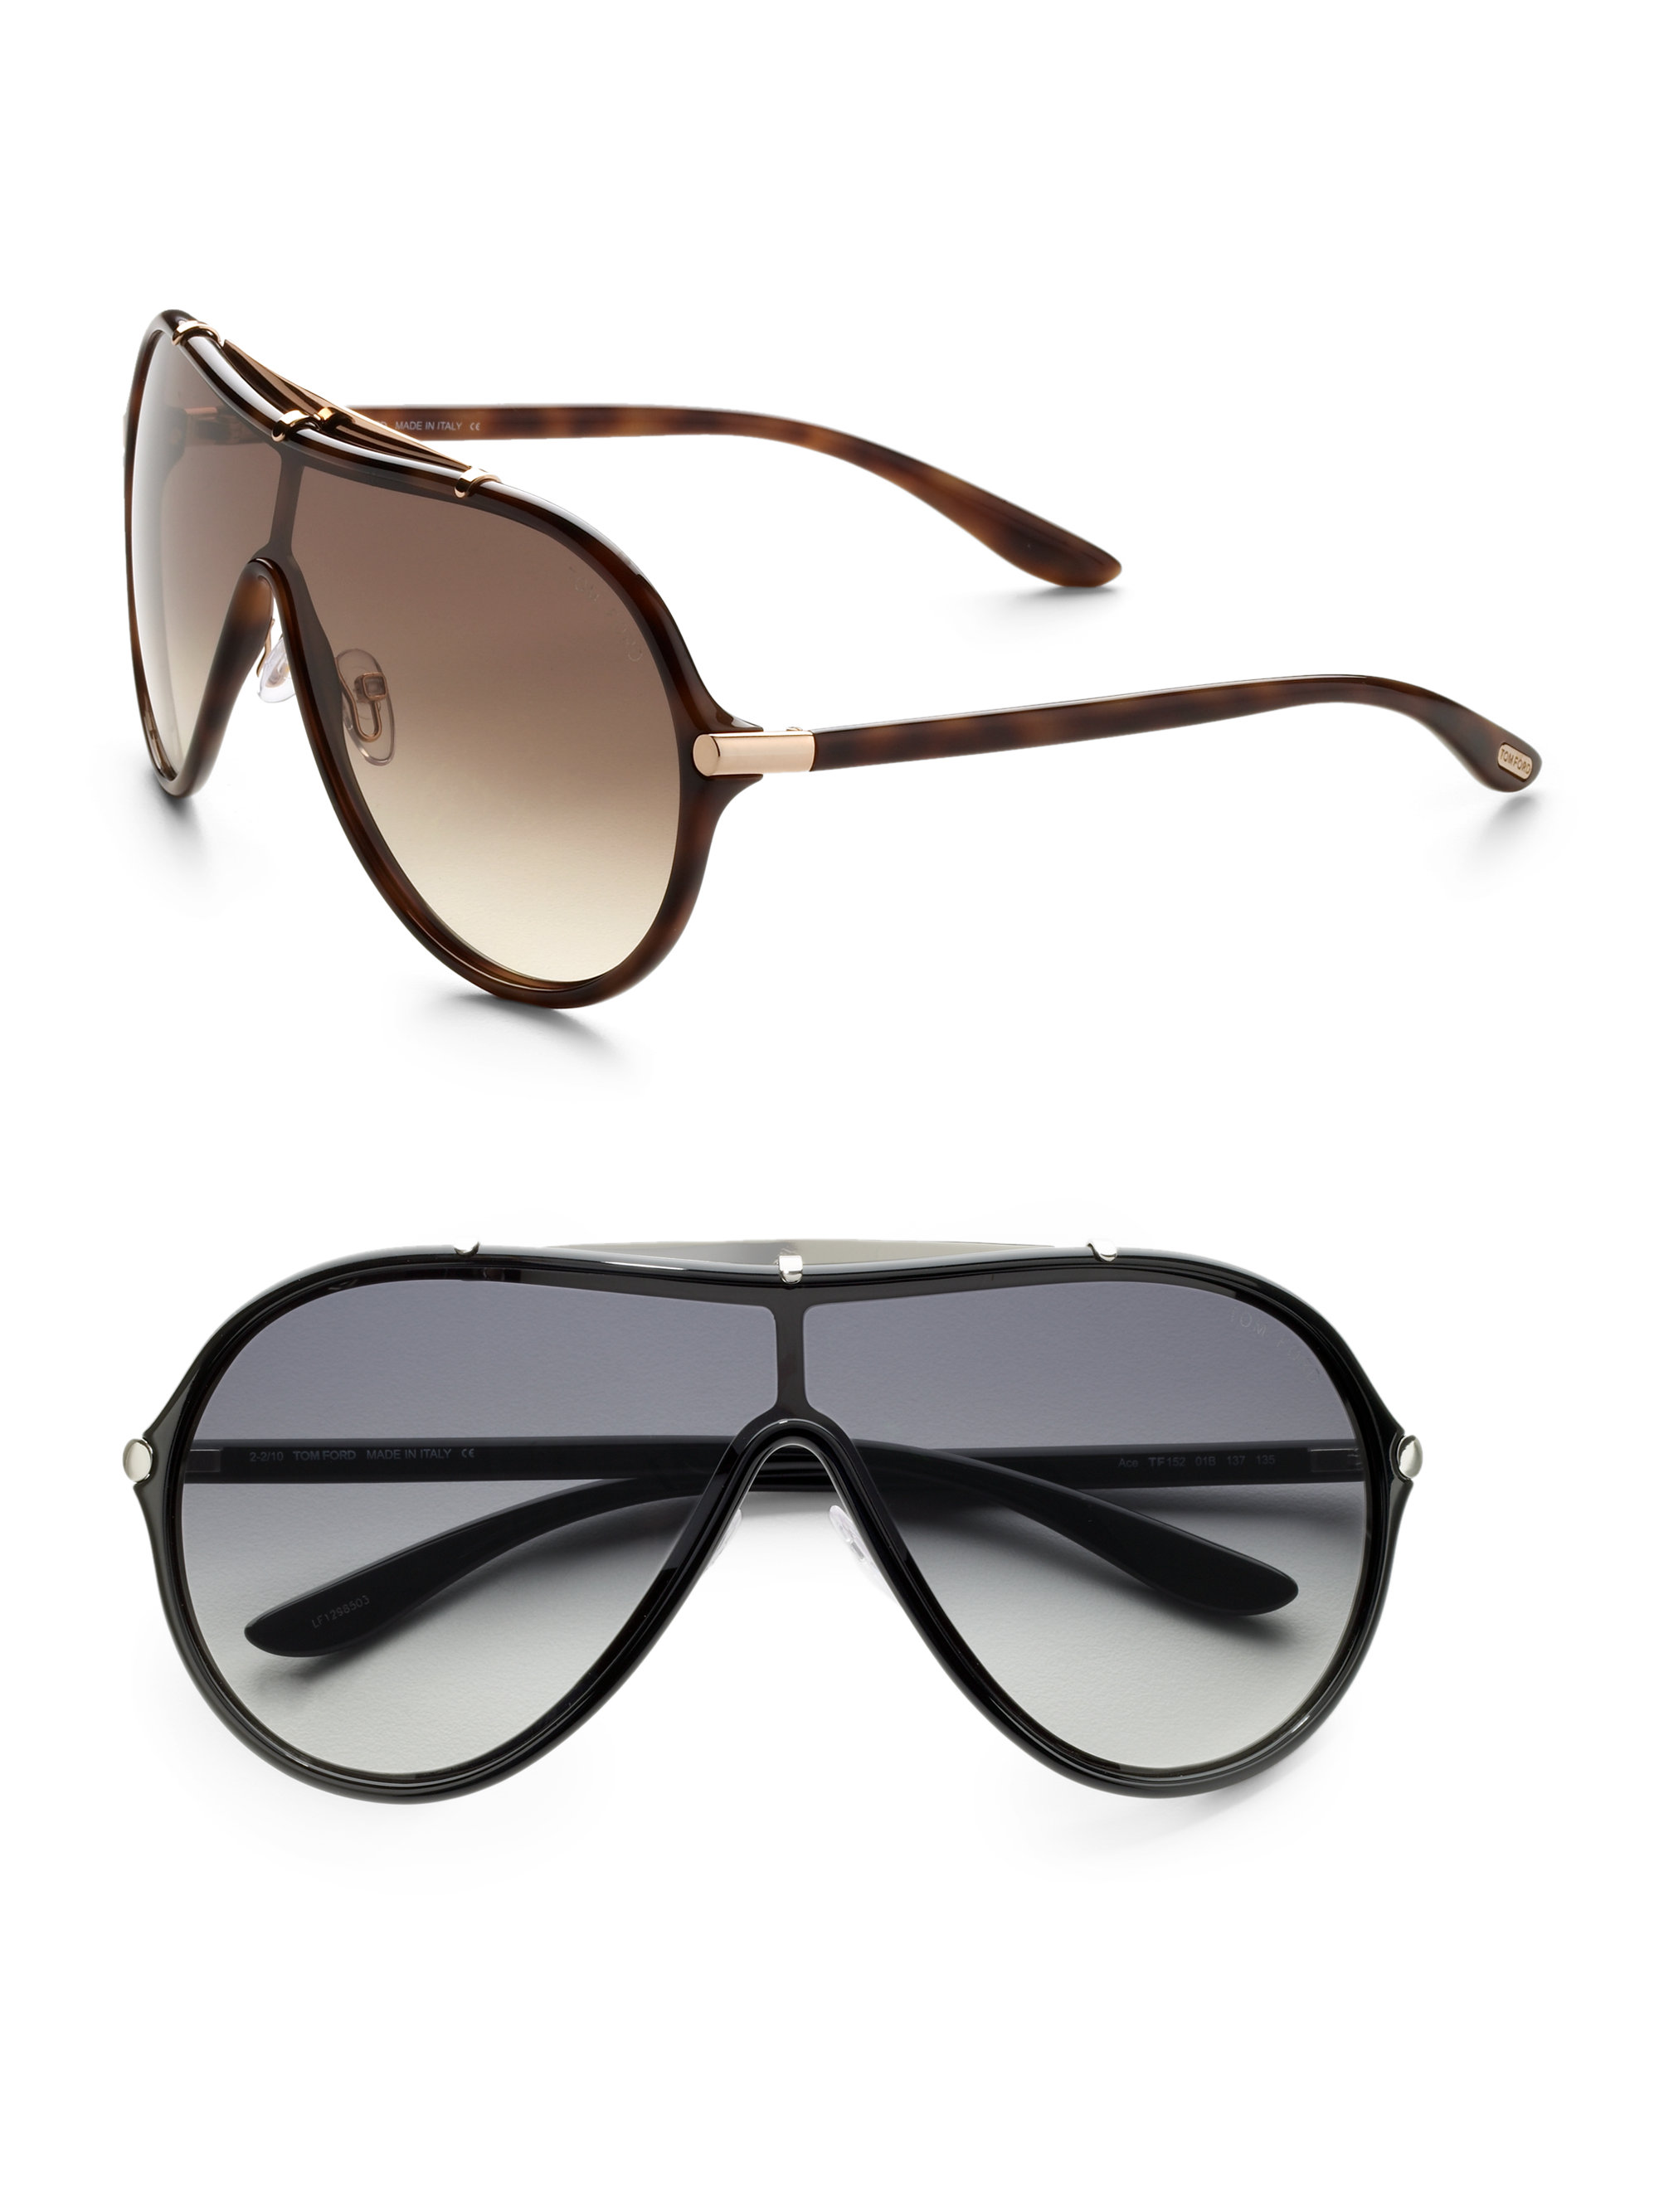 Tom ford ace oversized shield sunglasses #1